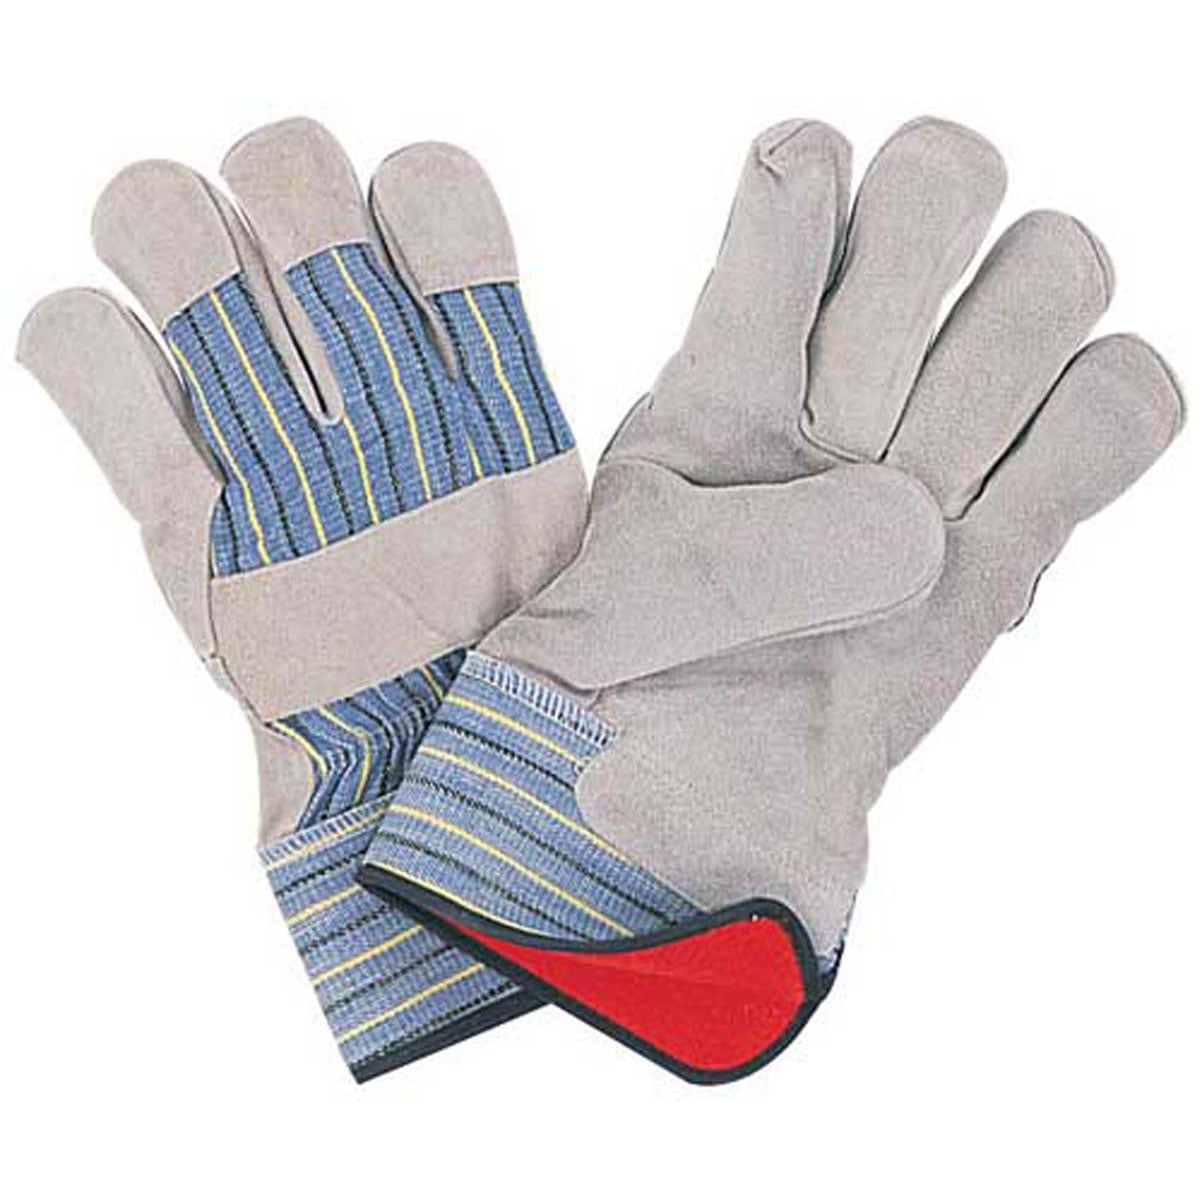 HAWK (2 Pairs) Men's Heavy Duty | Size Large (L) | Red Cotton Lined |  Leather Palm Gloves | Blue & Yellow Striped Cotton Back | Gauntlet Cuff